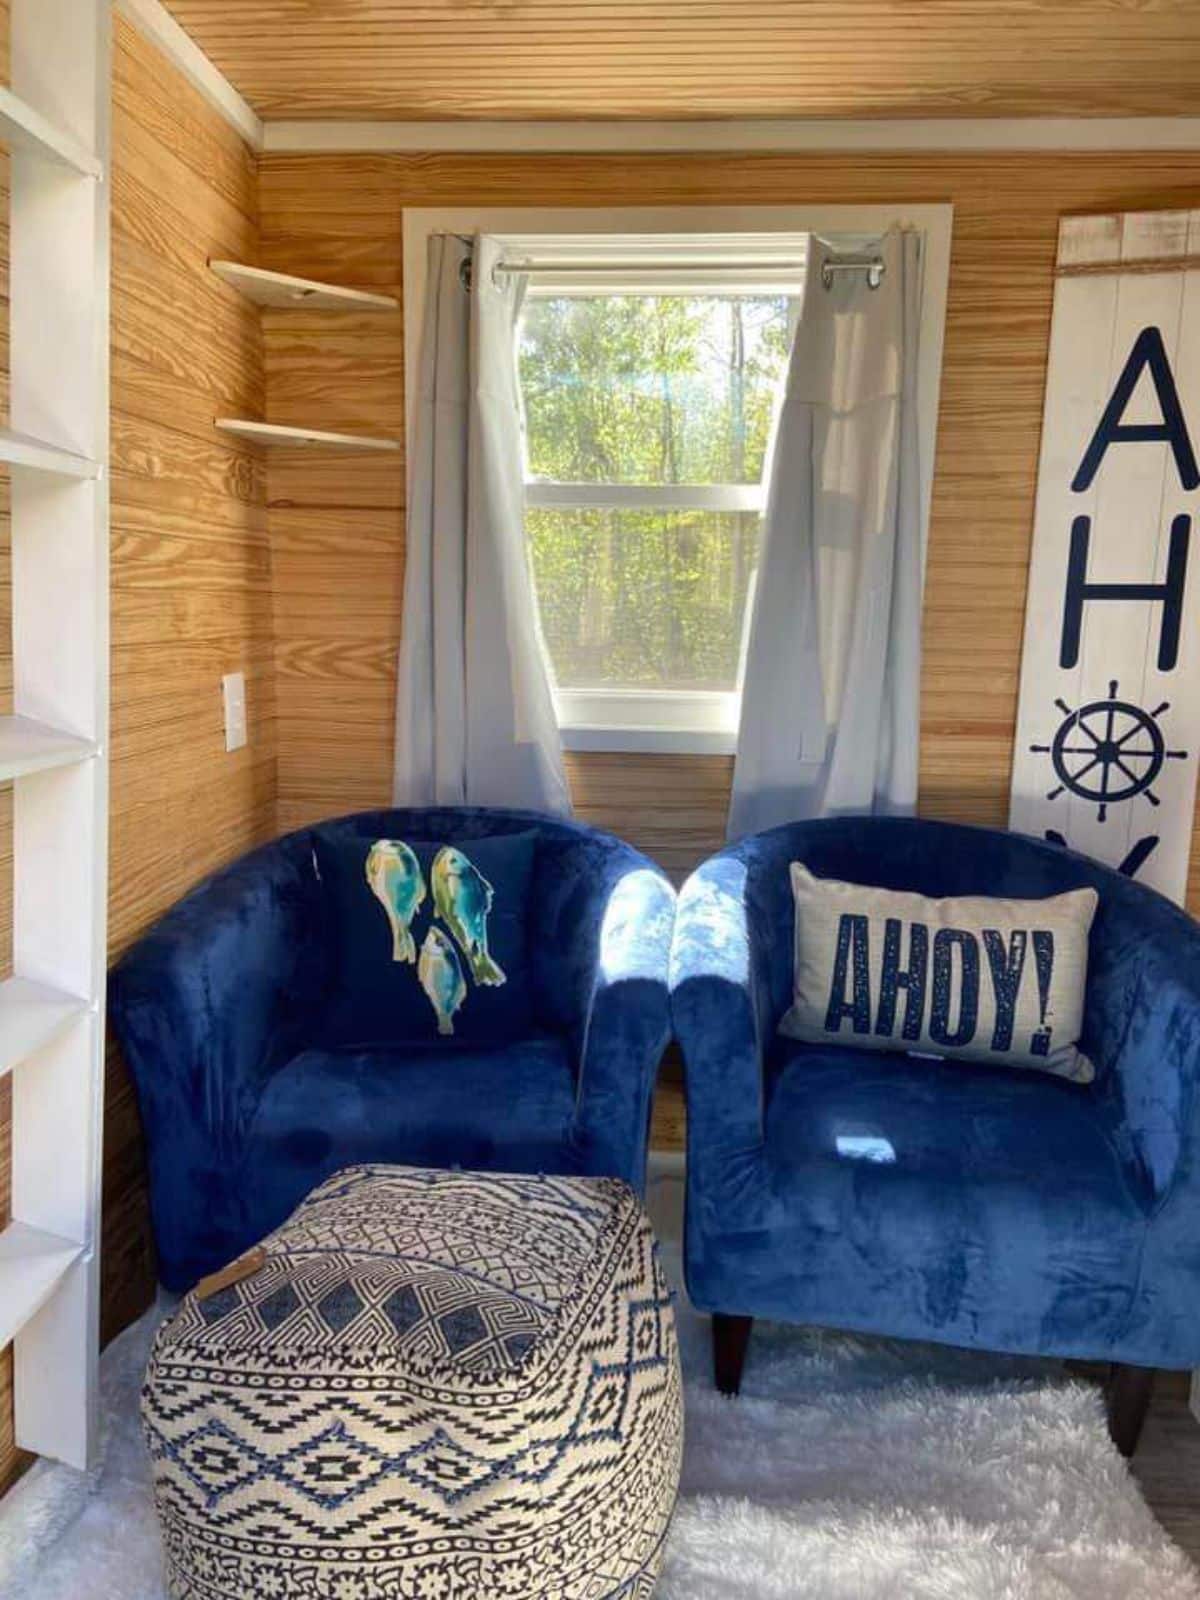 living area of cozy tiny home has a couch